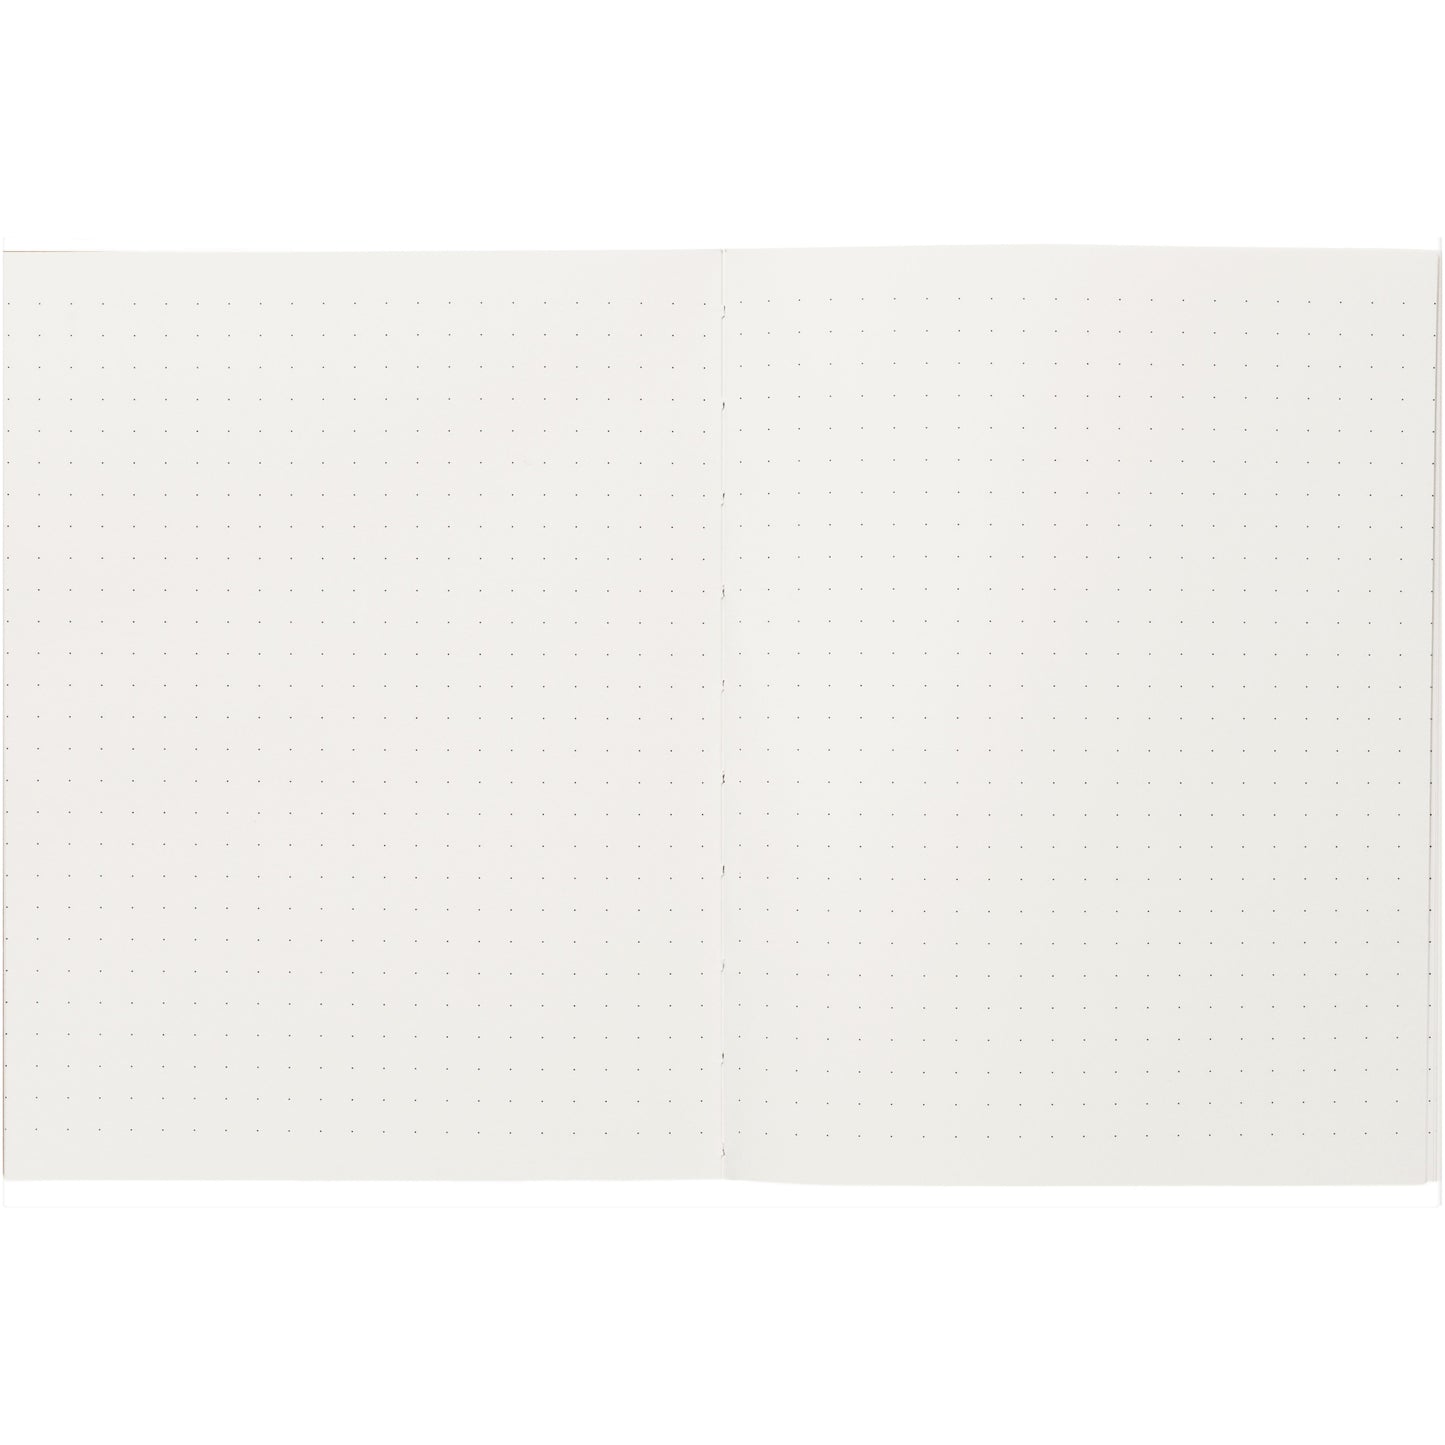 Layflat notebook with dark blue softcover with red grid lines, inner dotted pages pictured